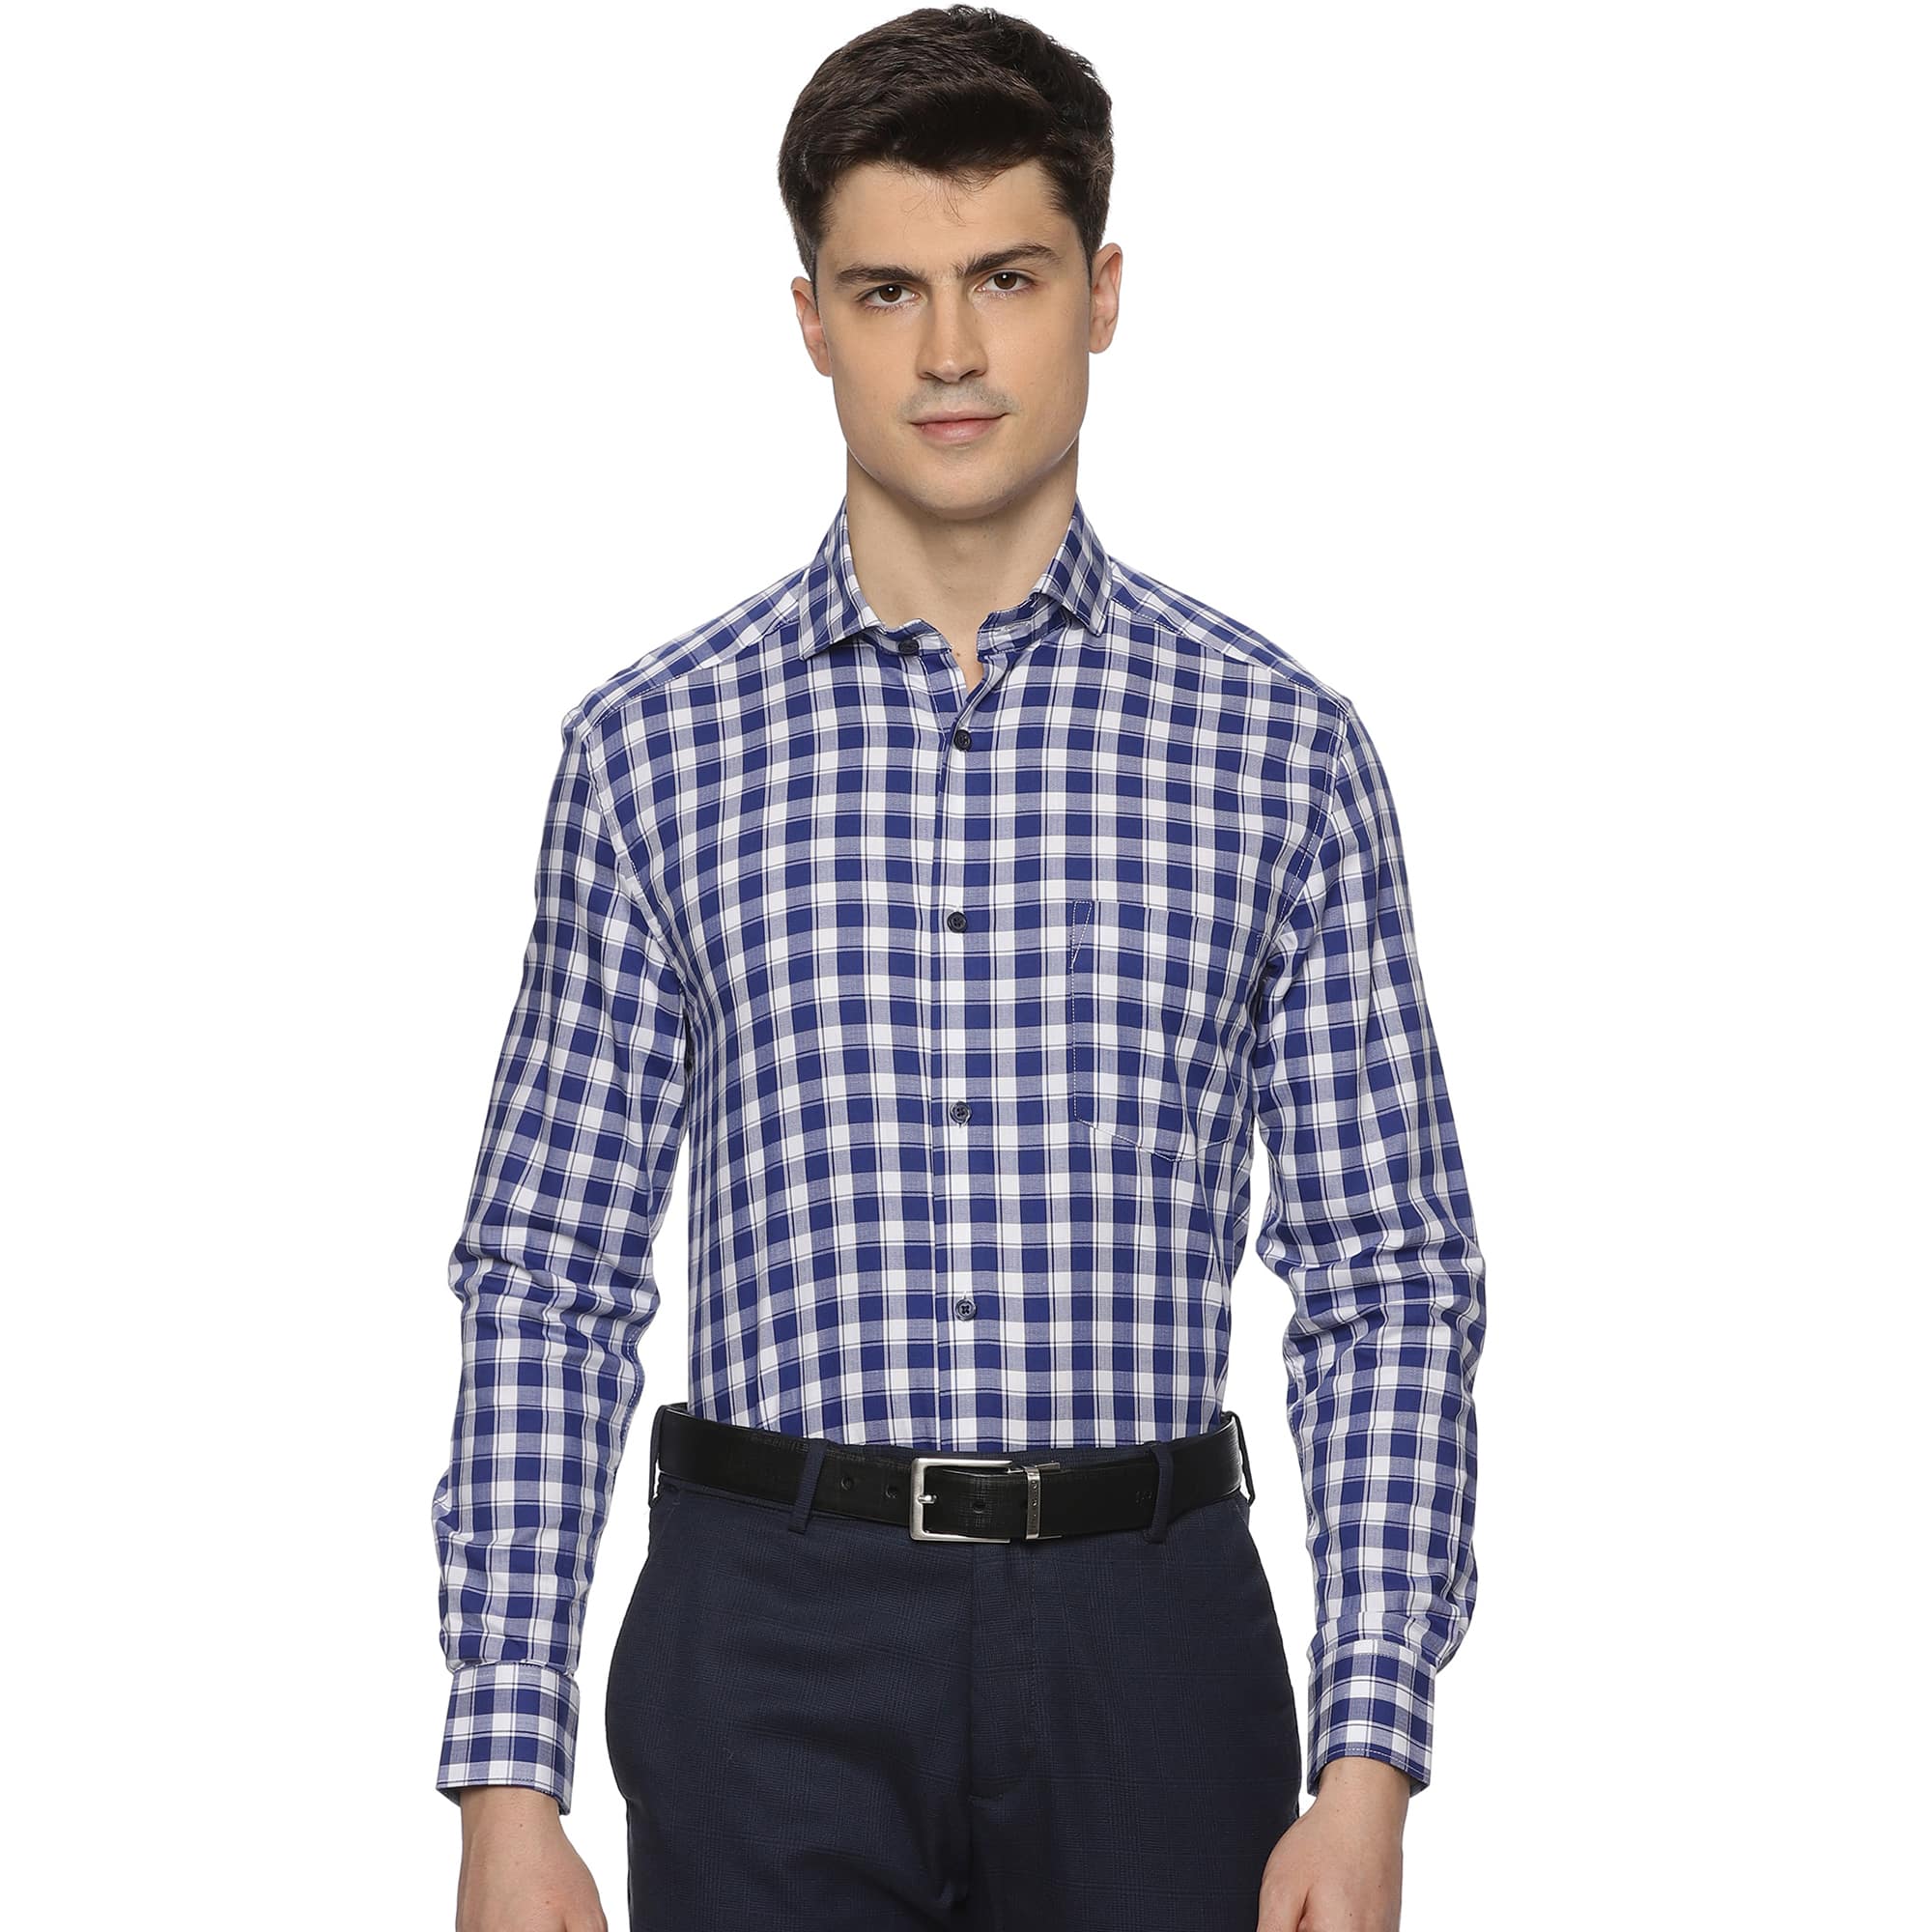 Rebel Cotton Check Shirt In White & Blue - The Formal Club